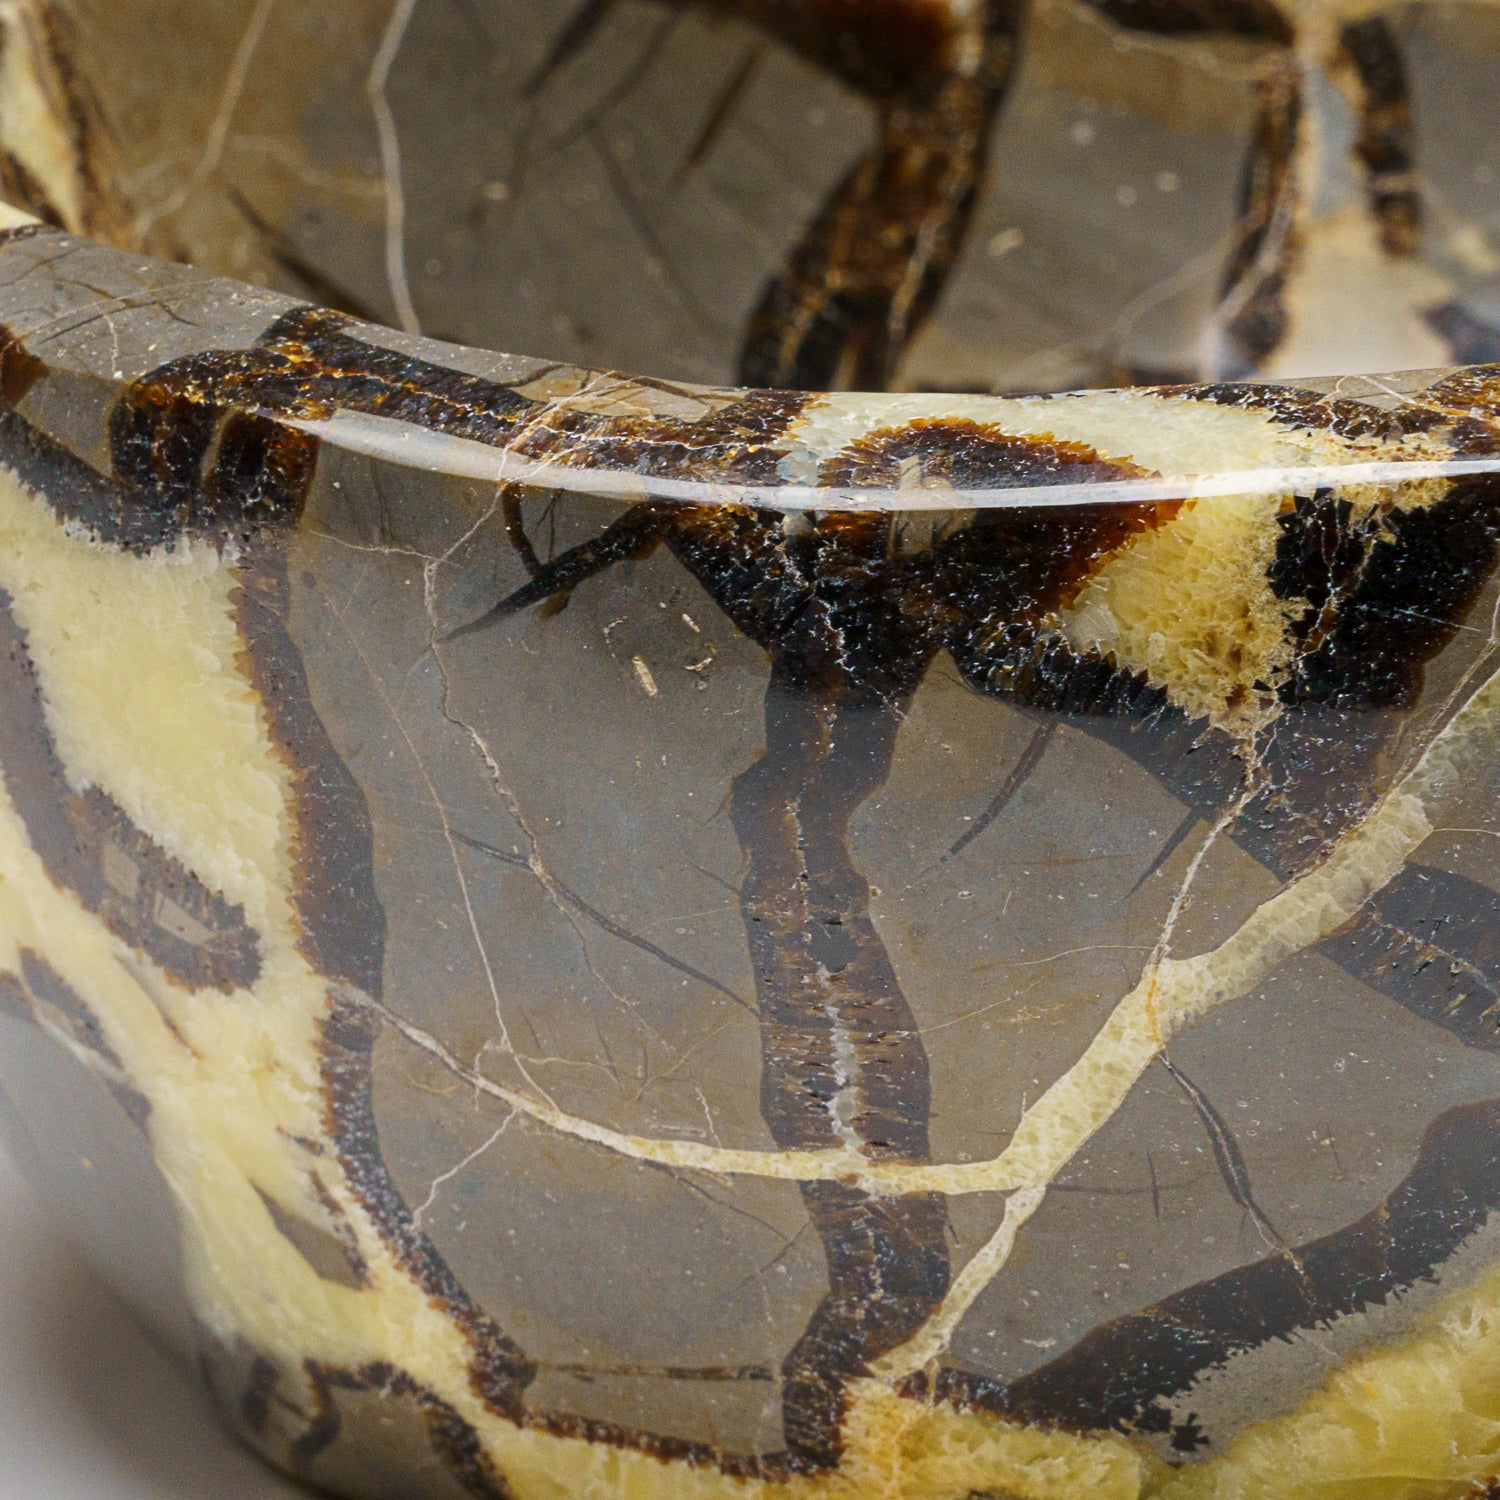 Genuine Polished Septarian Bowl from Madagascar (4.4 lbs)